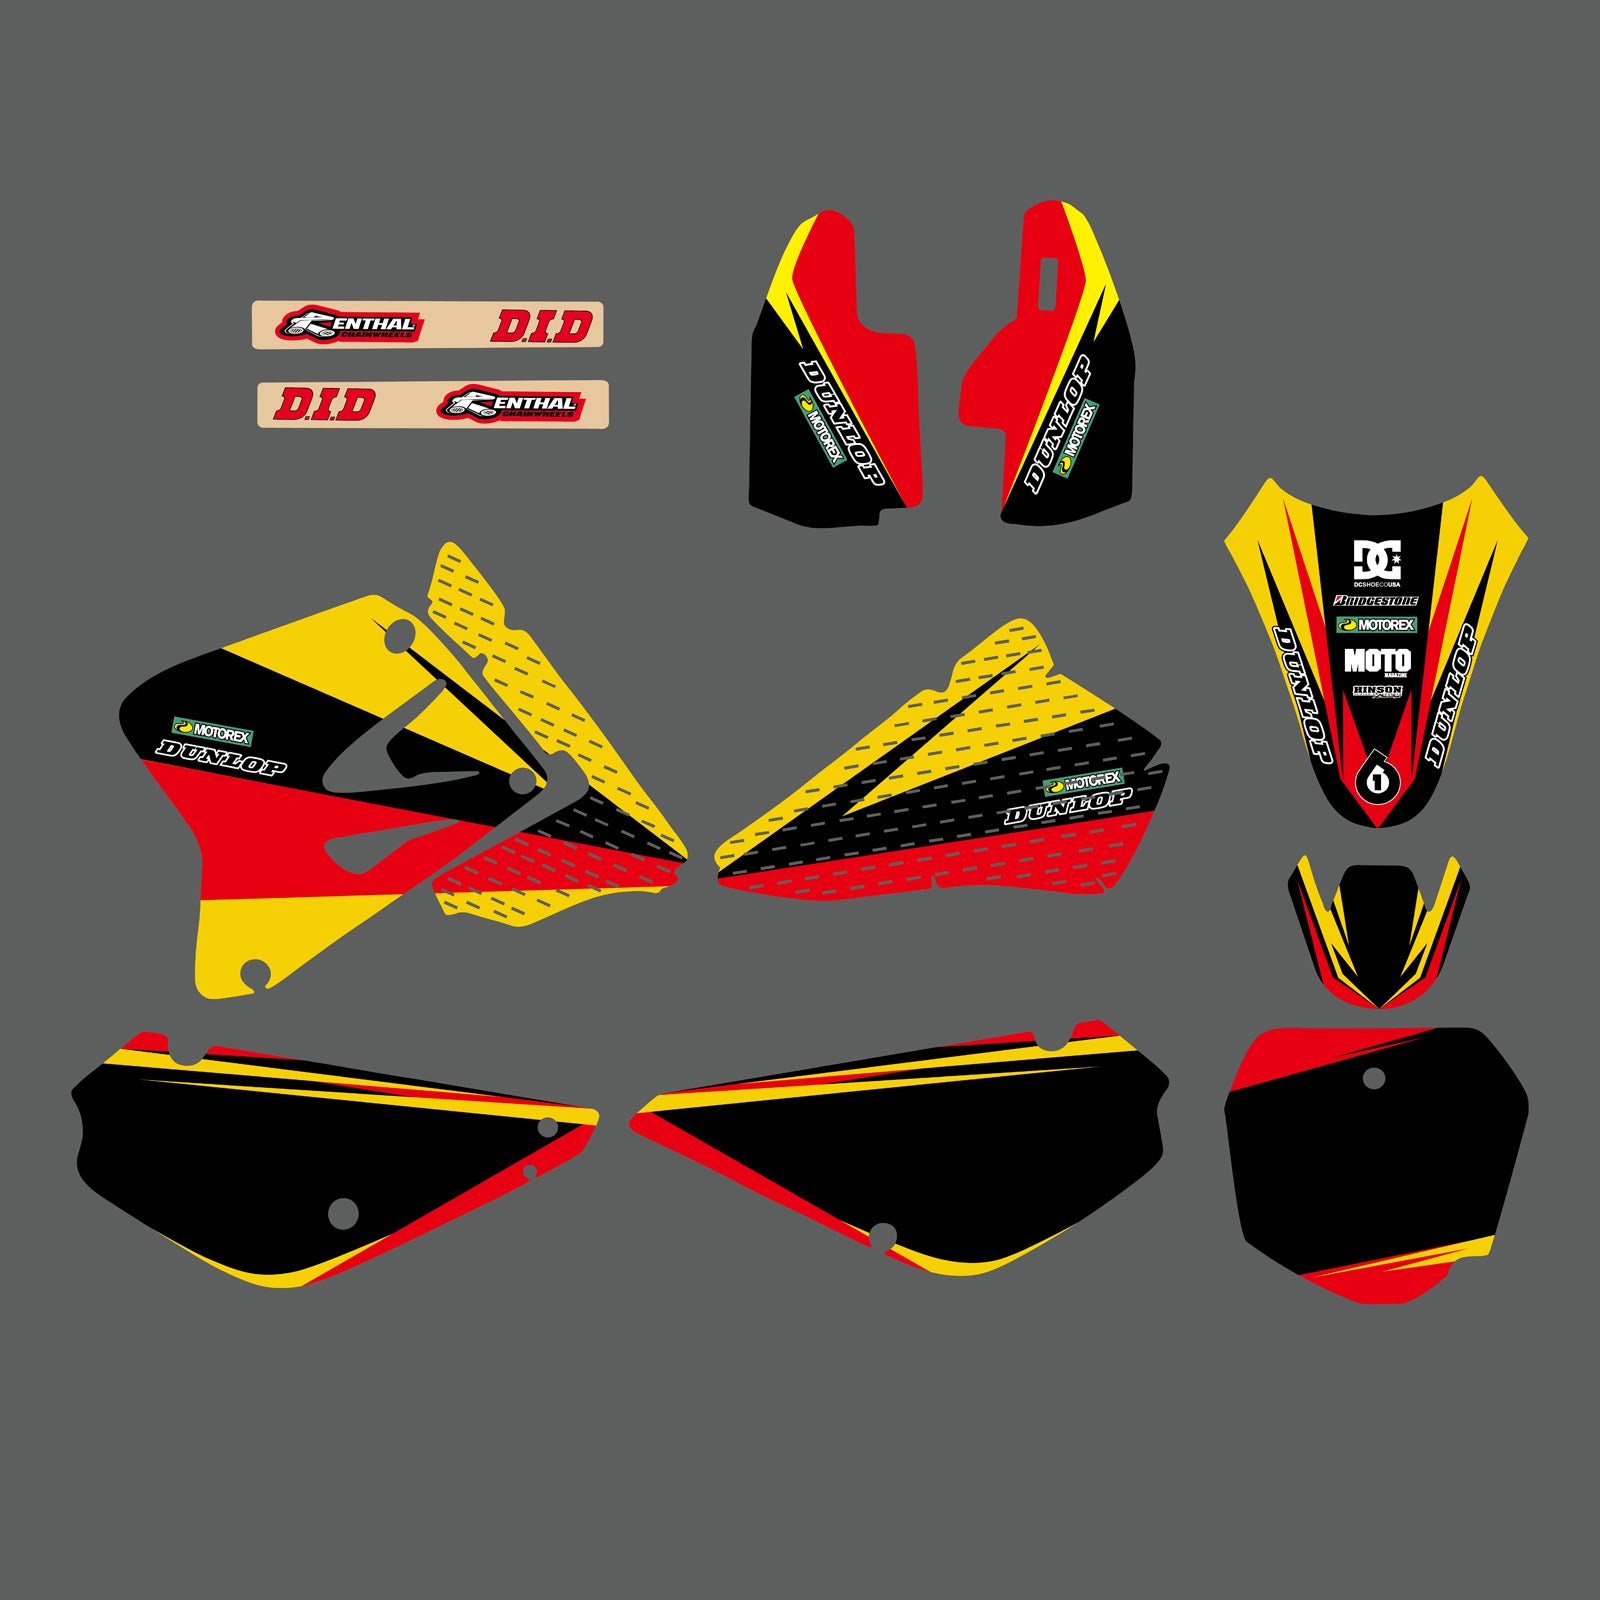 Full Graphics Background Decal Sticker Kit For SUZUKI RM80/RM85 2005-2018